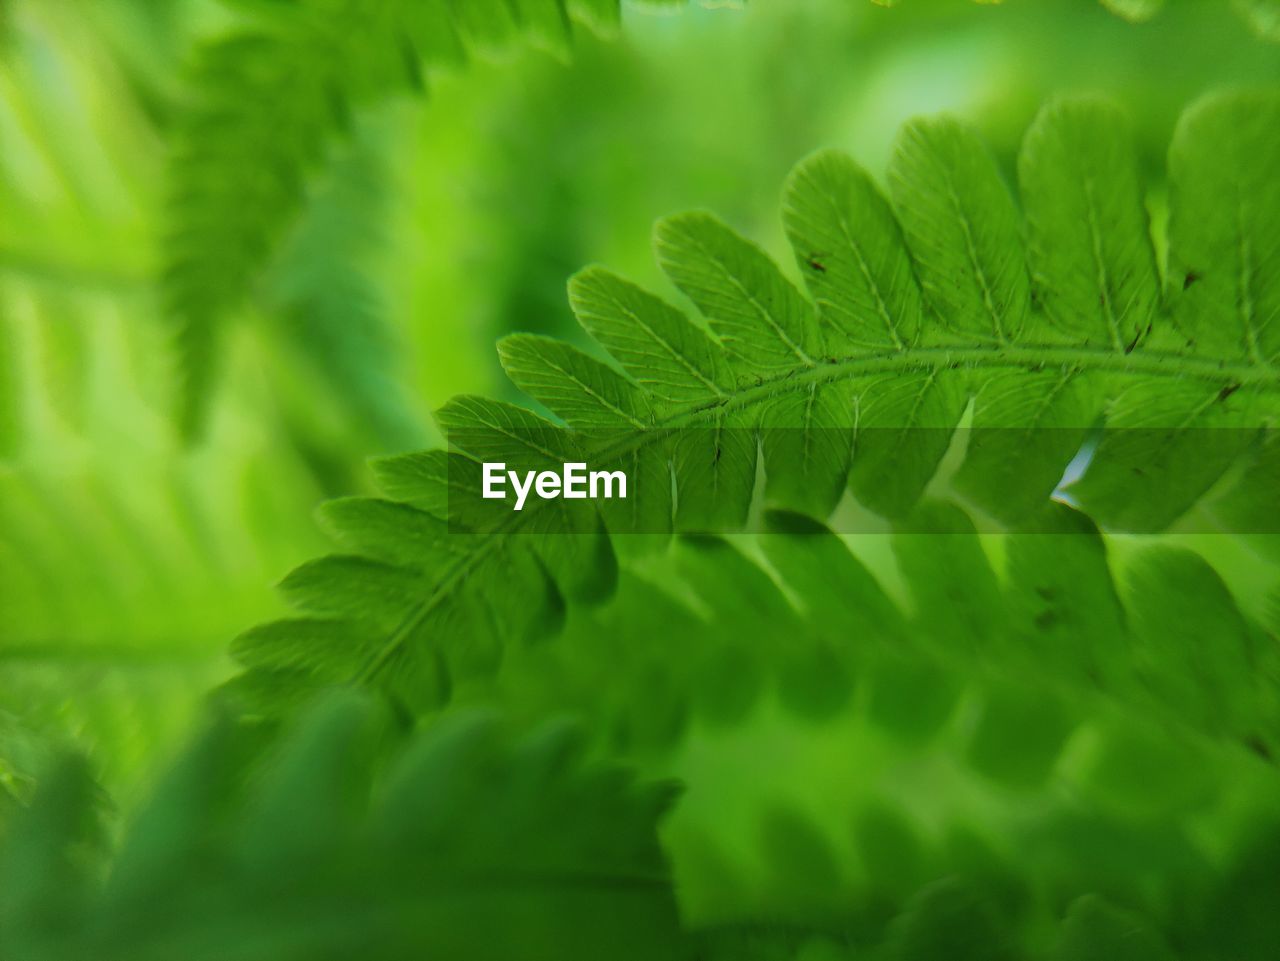 leaf, plant part, green, plant, nature, ferns and horsetails, fern, beauty in nature, close-up, no people, growth, backgrounds, environment, lush foliage, freshness, foliage, tree, plant stem, flower, selective focus, leaf vein, outdoors, macro photography, land, tropical climate, macro, forest, environmental conservation, full frame, vibrant color, frond, food and drink, palm leaf, botany, summer, grass, day, herb, extreme close-up